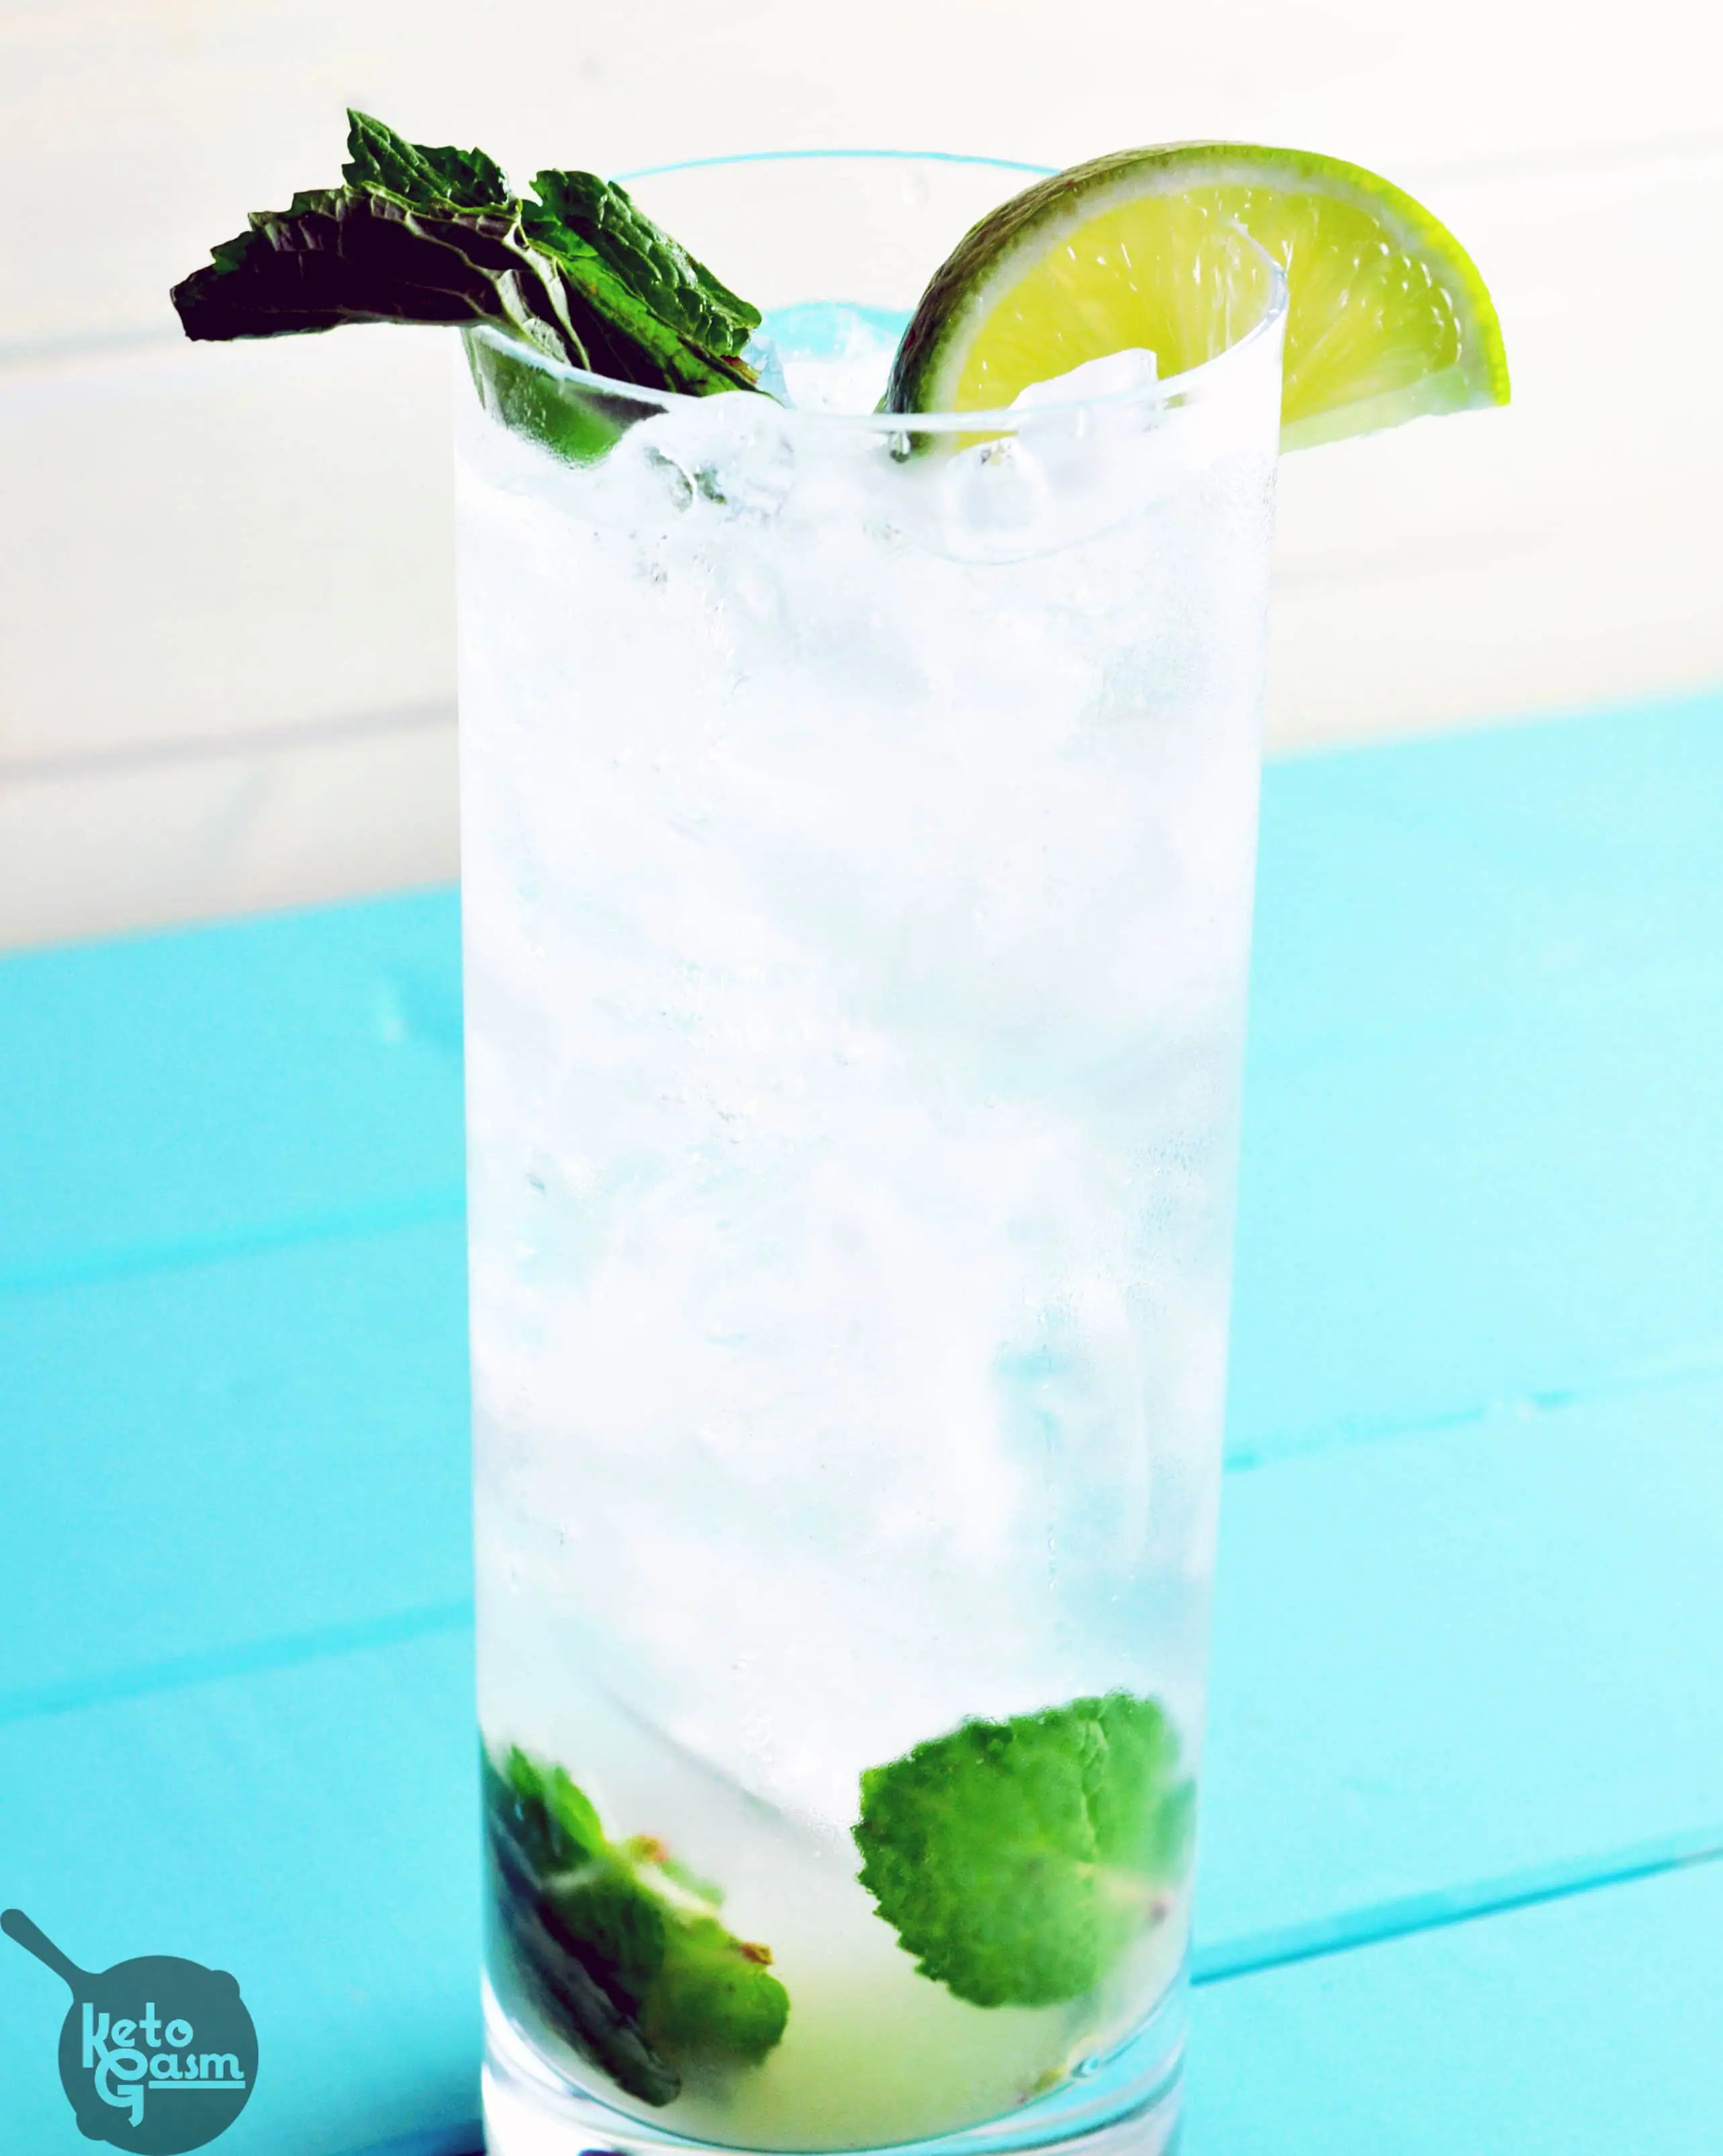 Sugar-Free Vodka Mojito | KETOGASM This drink tastes identical to the mojitos served at my favorite local happy hour spot... without all the sugar and carbs! This cocktail is perfect if you are searching for a drink that is low carb, sugar free, or just want to try something new. #cocktails #healthy #lowcarb #sugarfree #diet #keto #lchf #ketosis #atkins #drinks #booze